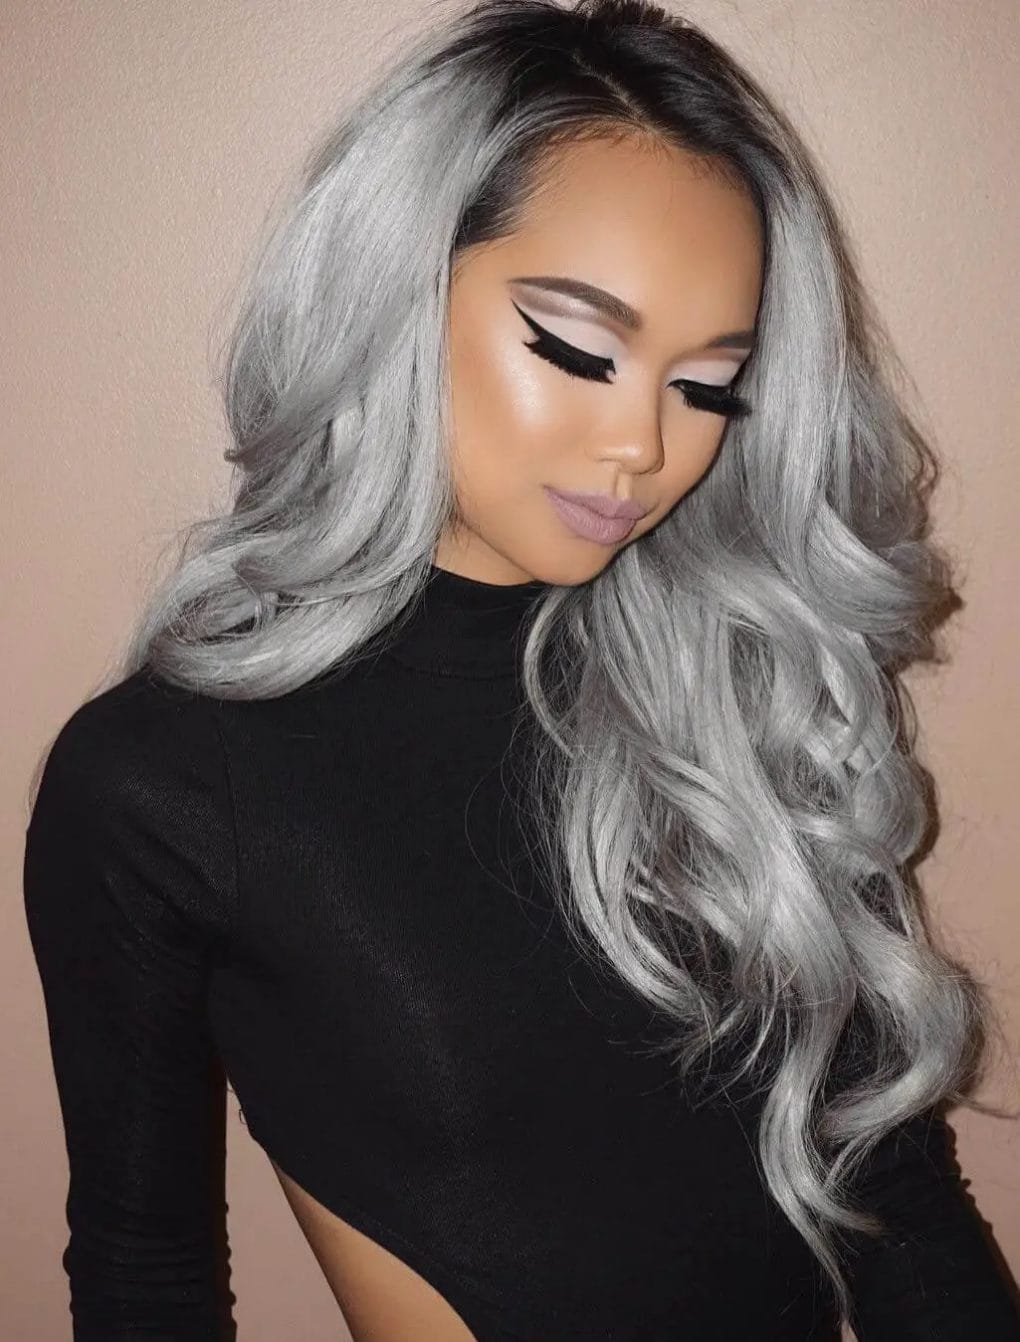 Pristine silver hue with subtle layers and soft, flowing waves for a chic, ethereal appearance.